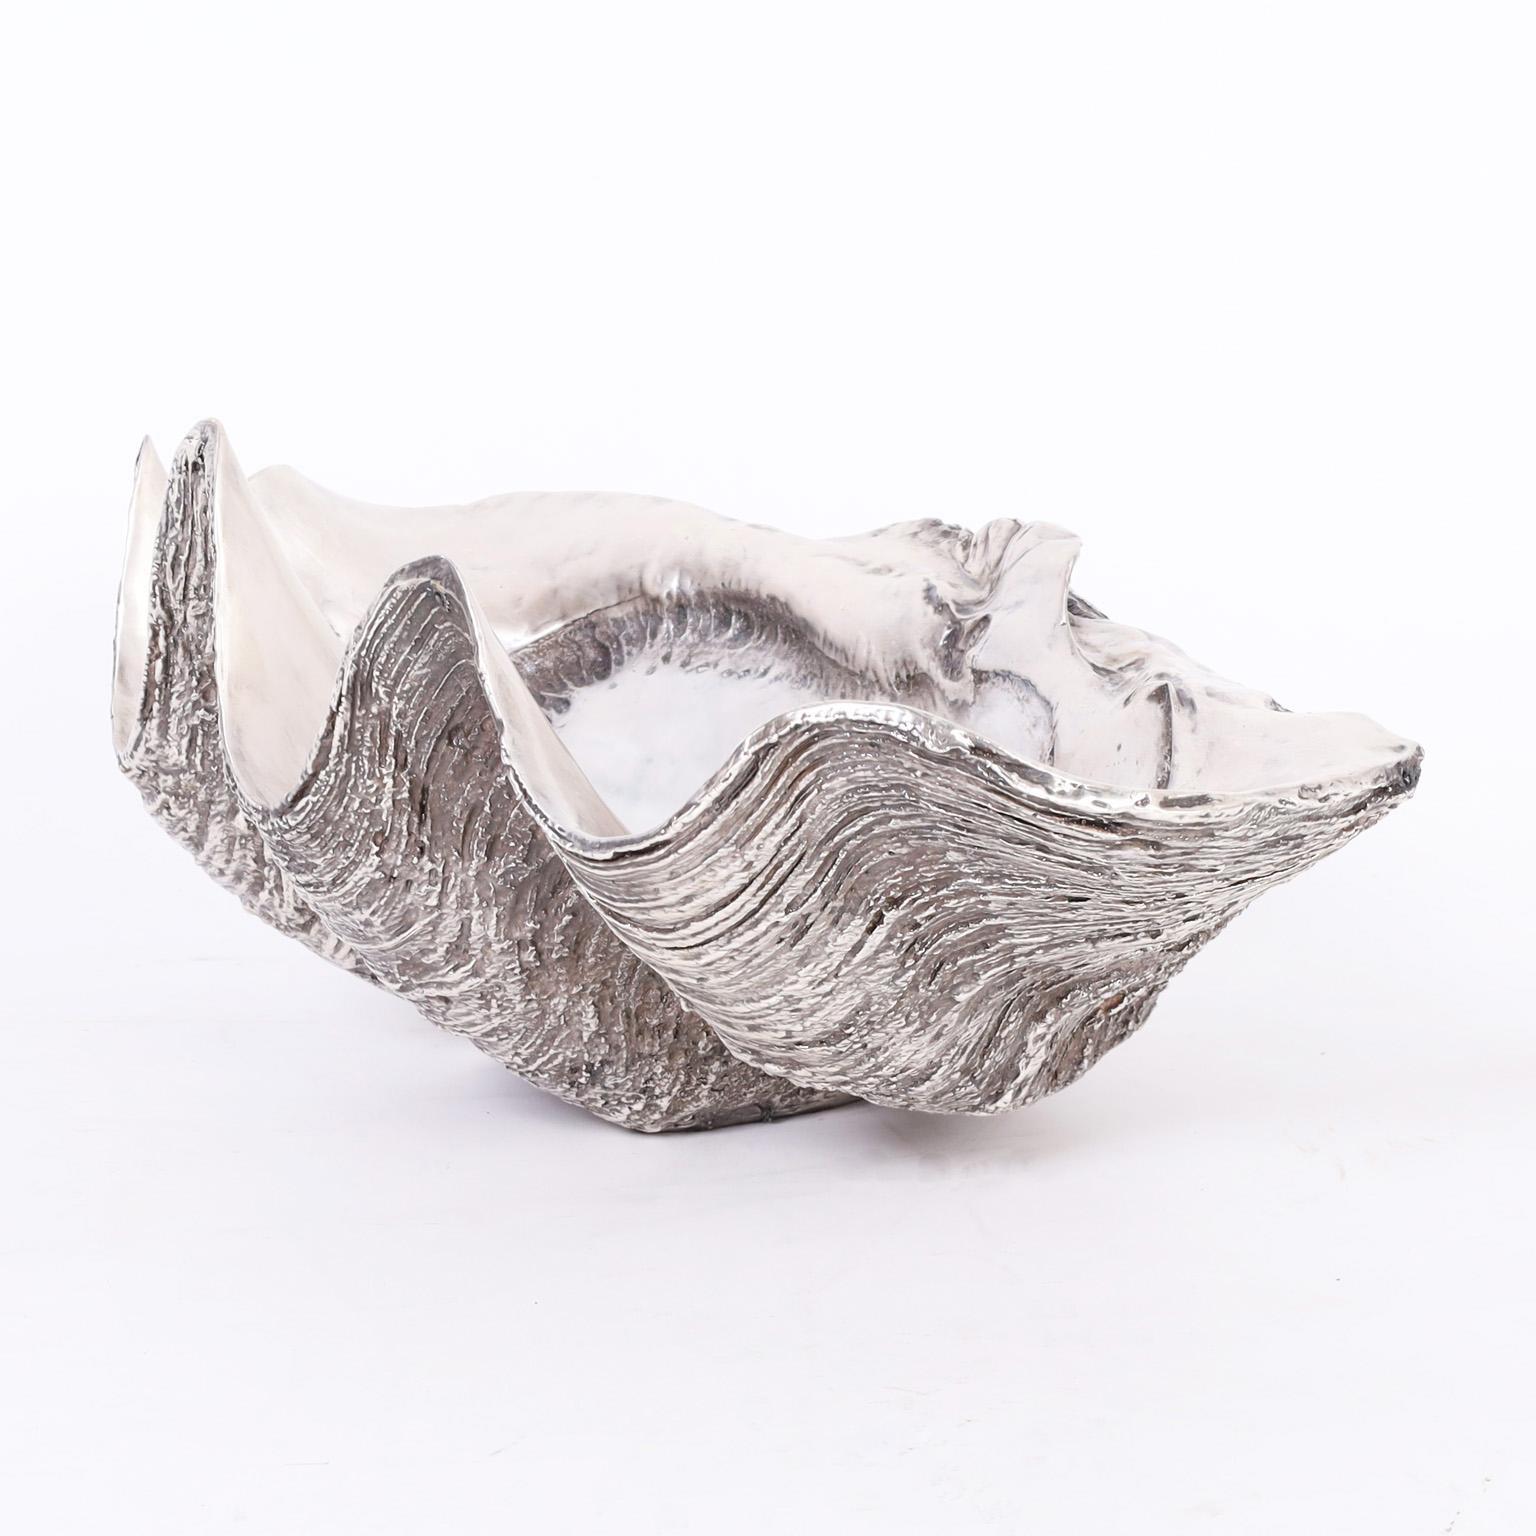 Silver Plate Life Size Giant Clam Shell Sculpture For Sale 1